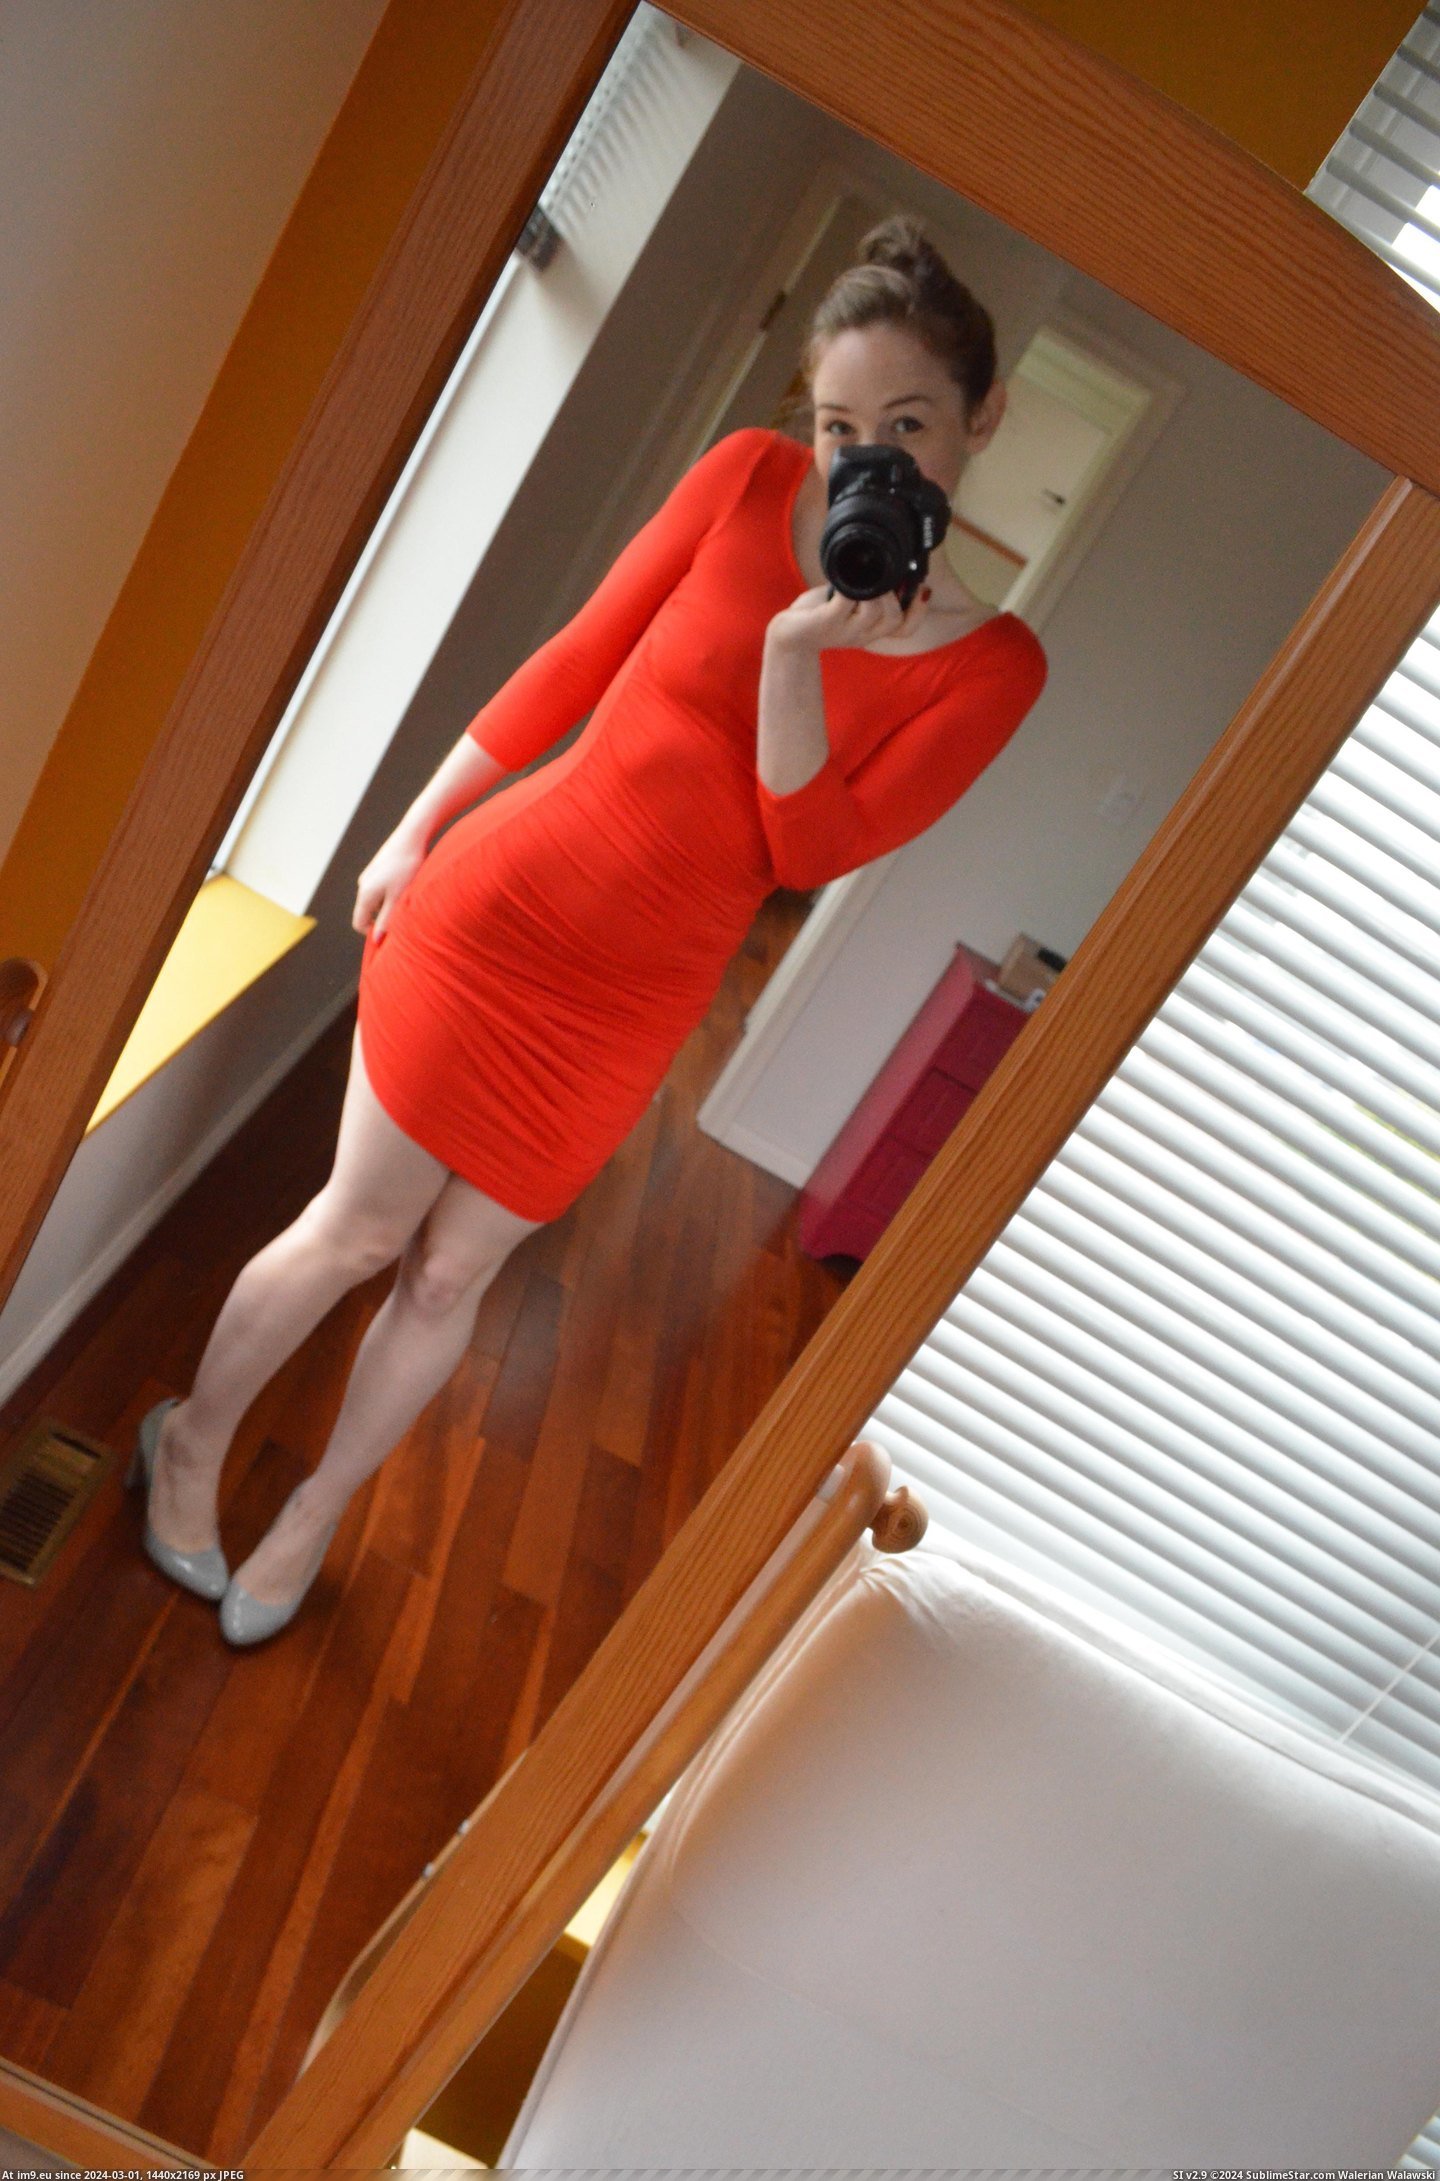 #Tight #Dress #Xmas #Too #Party [Gonewild] Is this dress too tight [f]or an Xmas party? 4 Pic. (Изображение из альбом My r/GONEWILD favs))